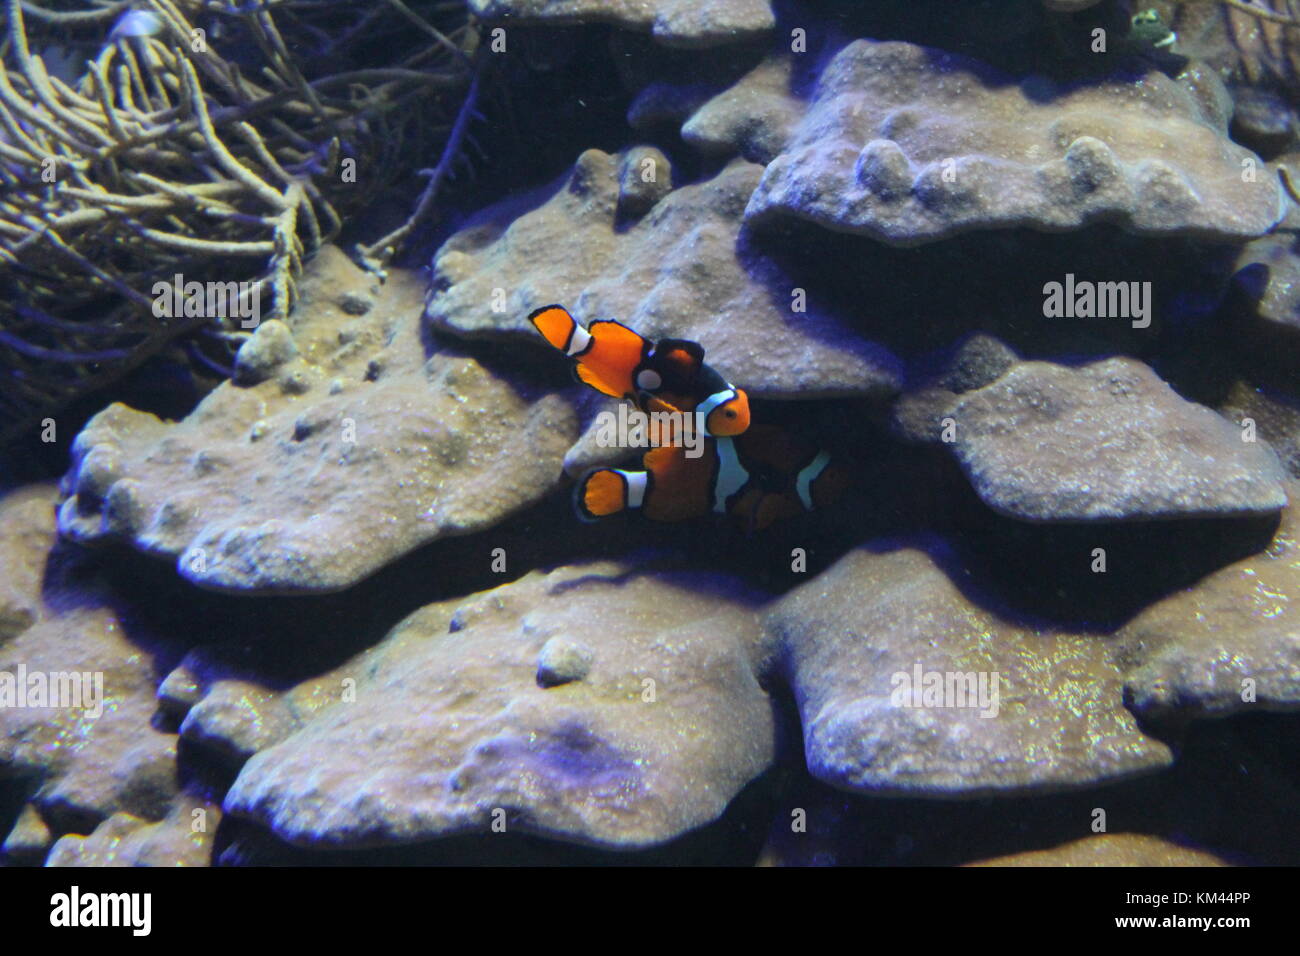 Clown fish Playing together in their salt water Aquarium. Stock Photo